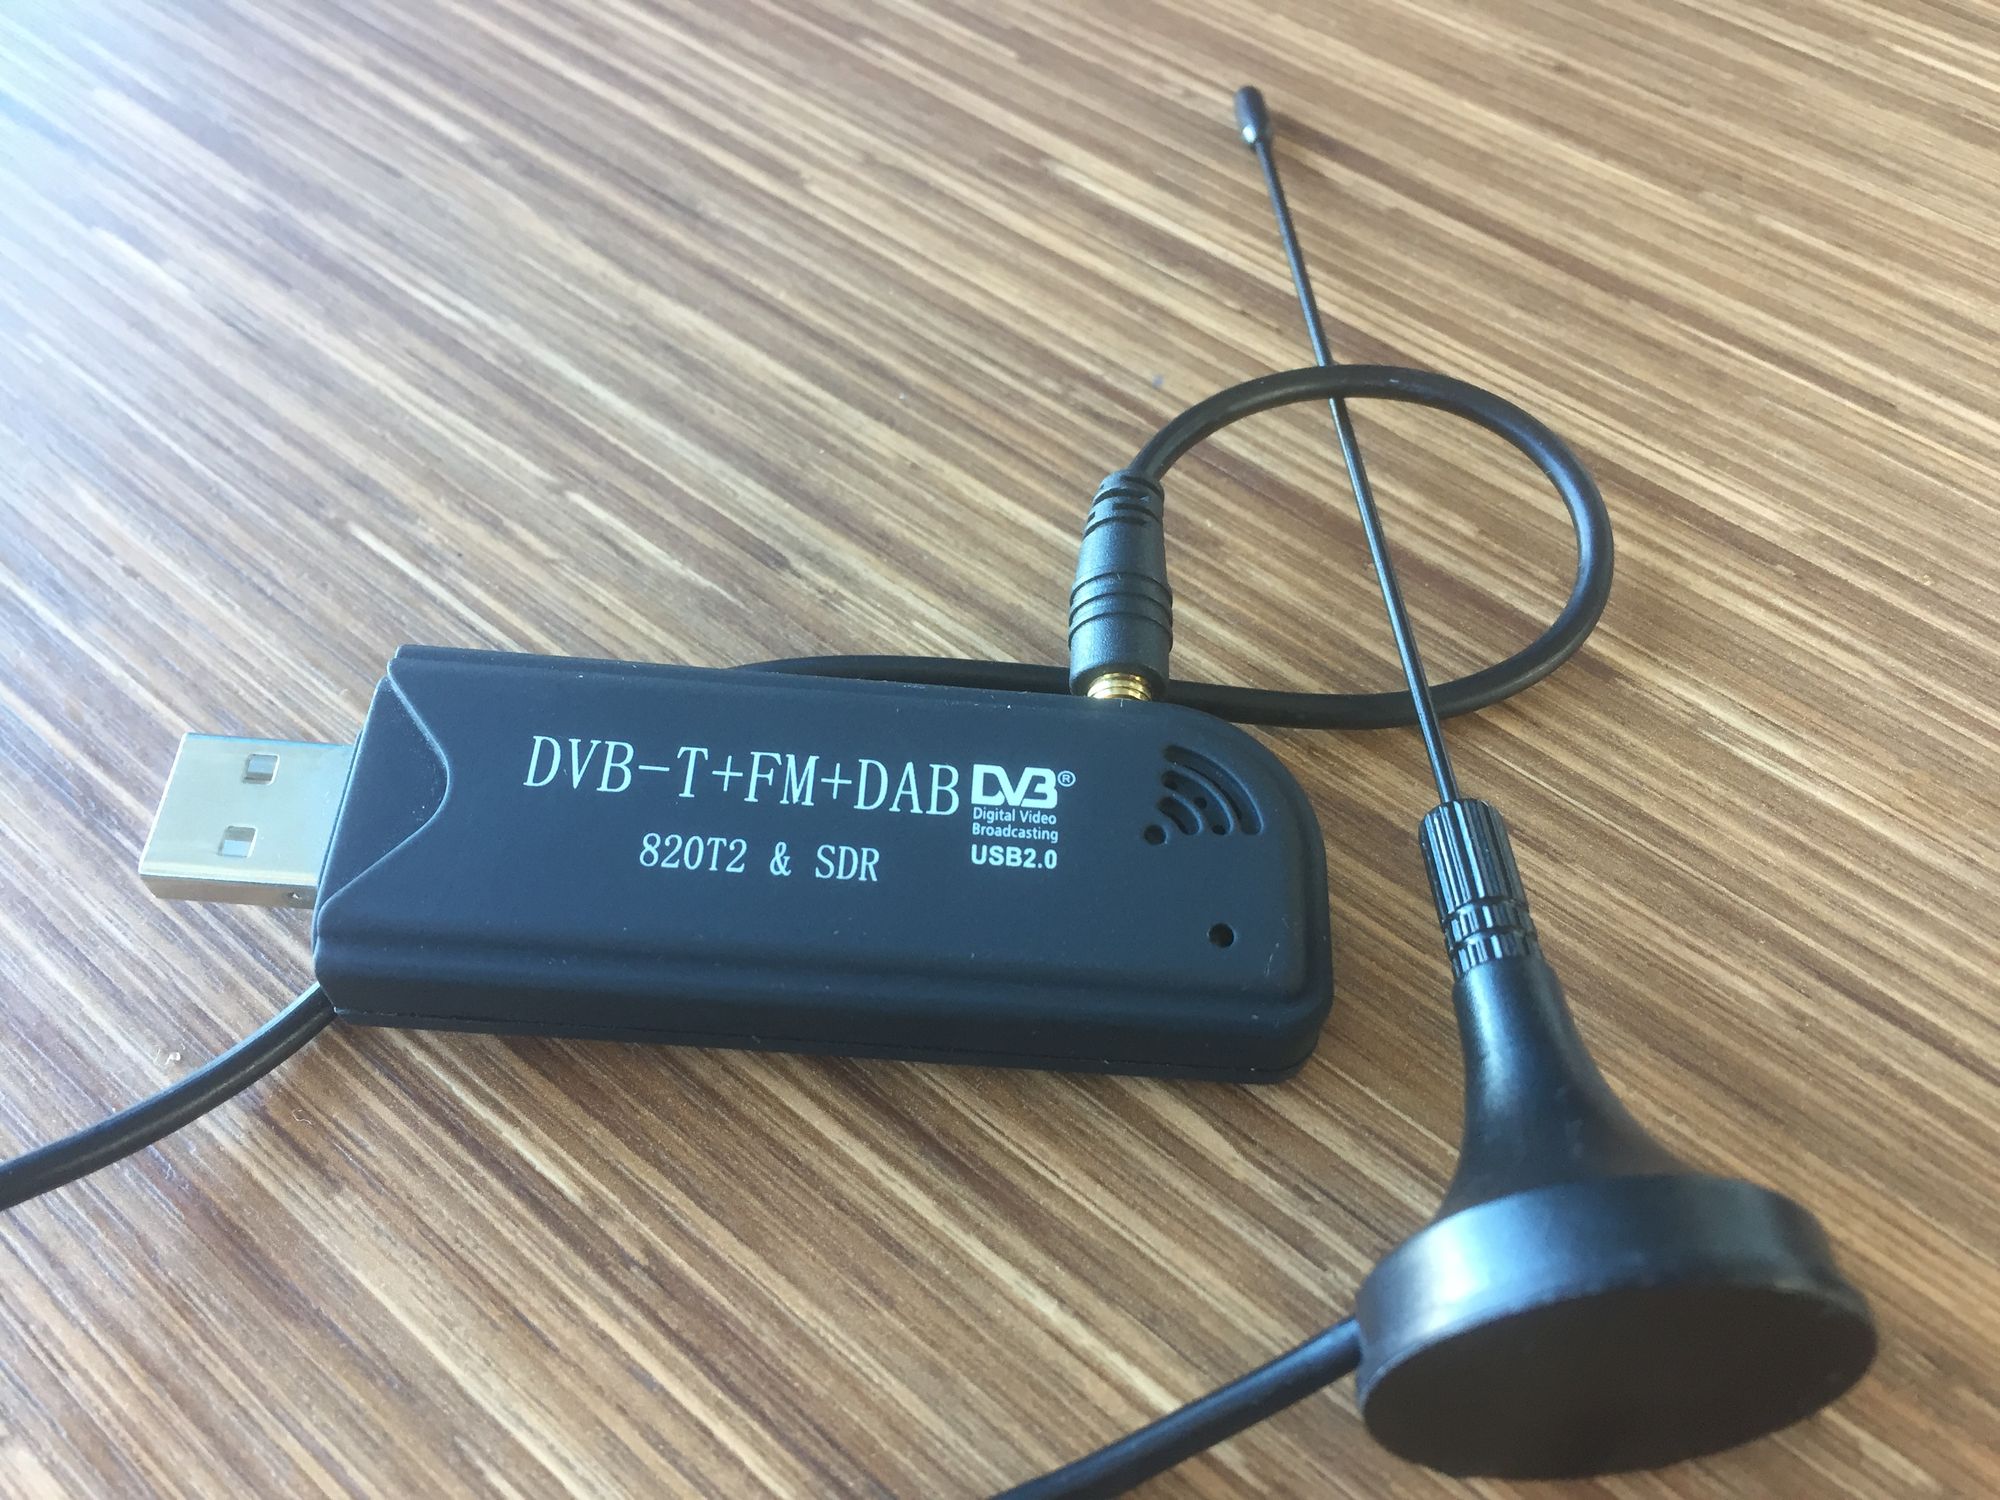 Track planes with your Software Defined Radio (SDR)